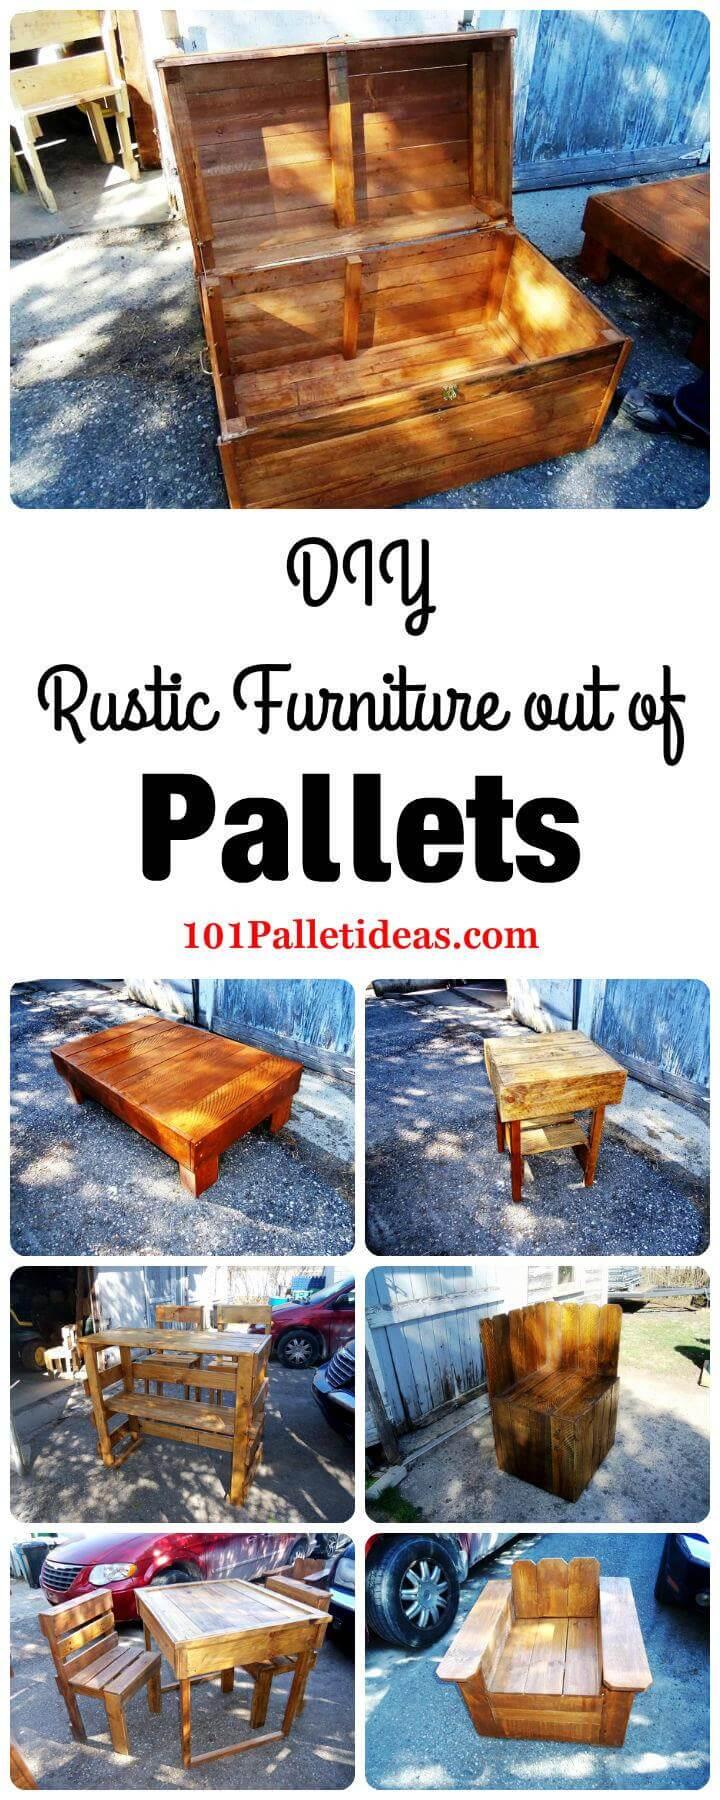 Furniture out of Pallets